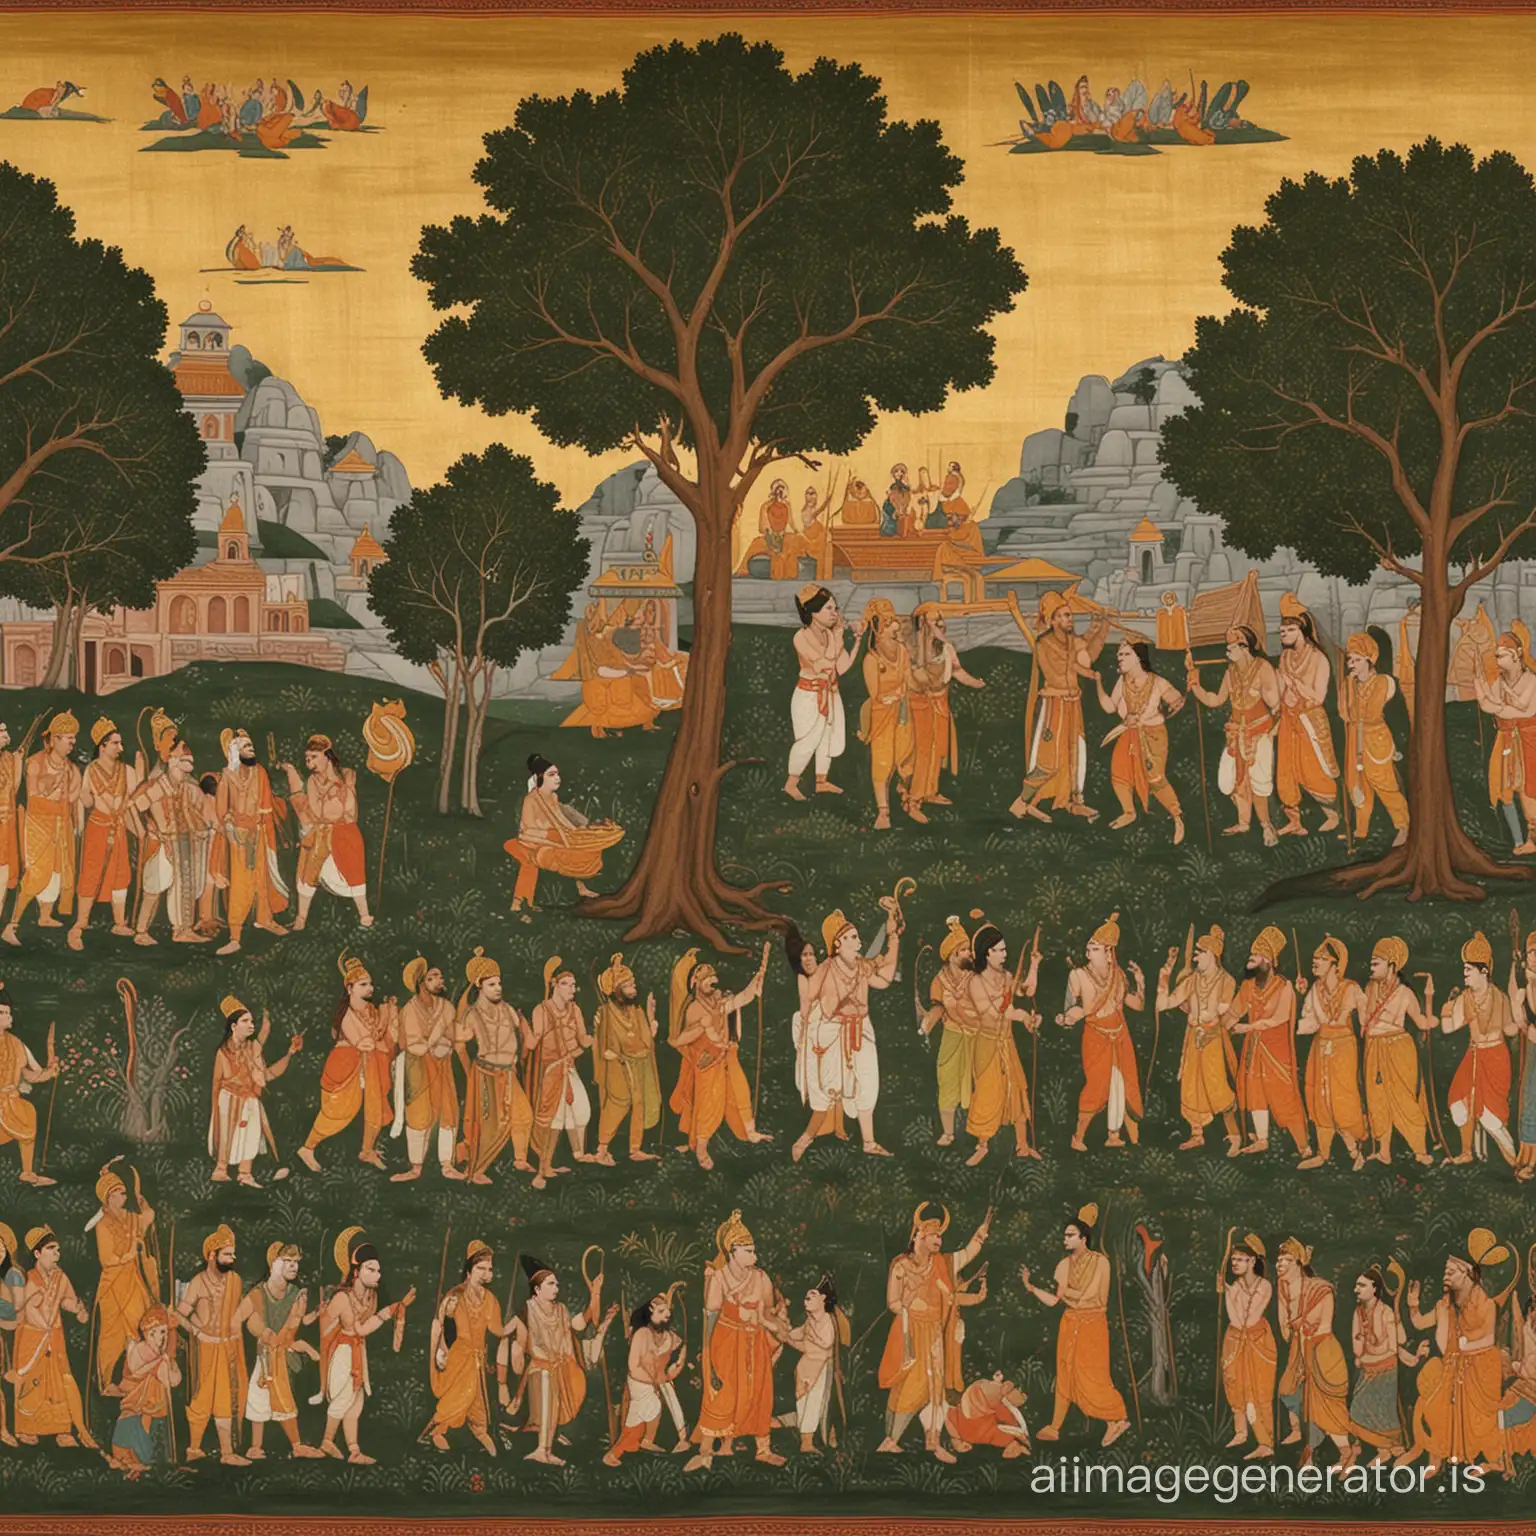 Scenes from the Raghukul dynasty of Lord Rama